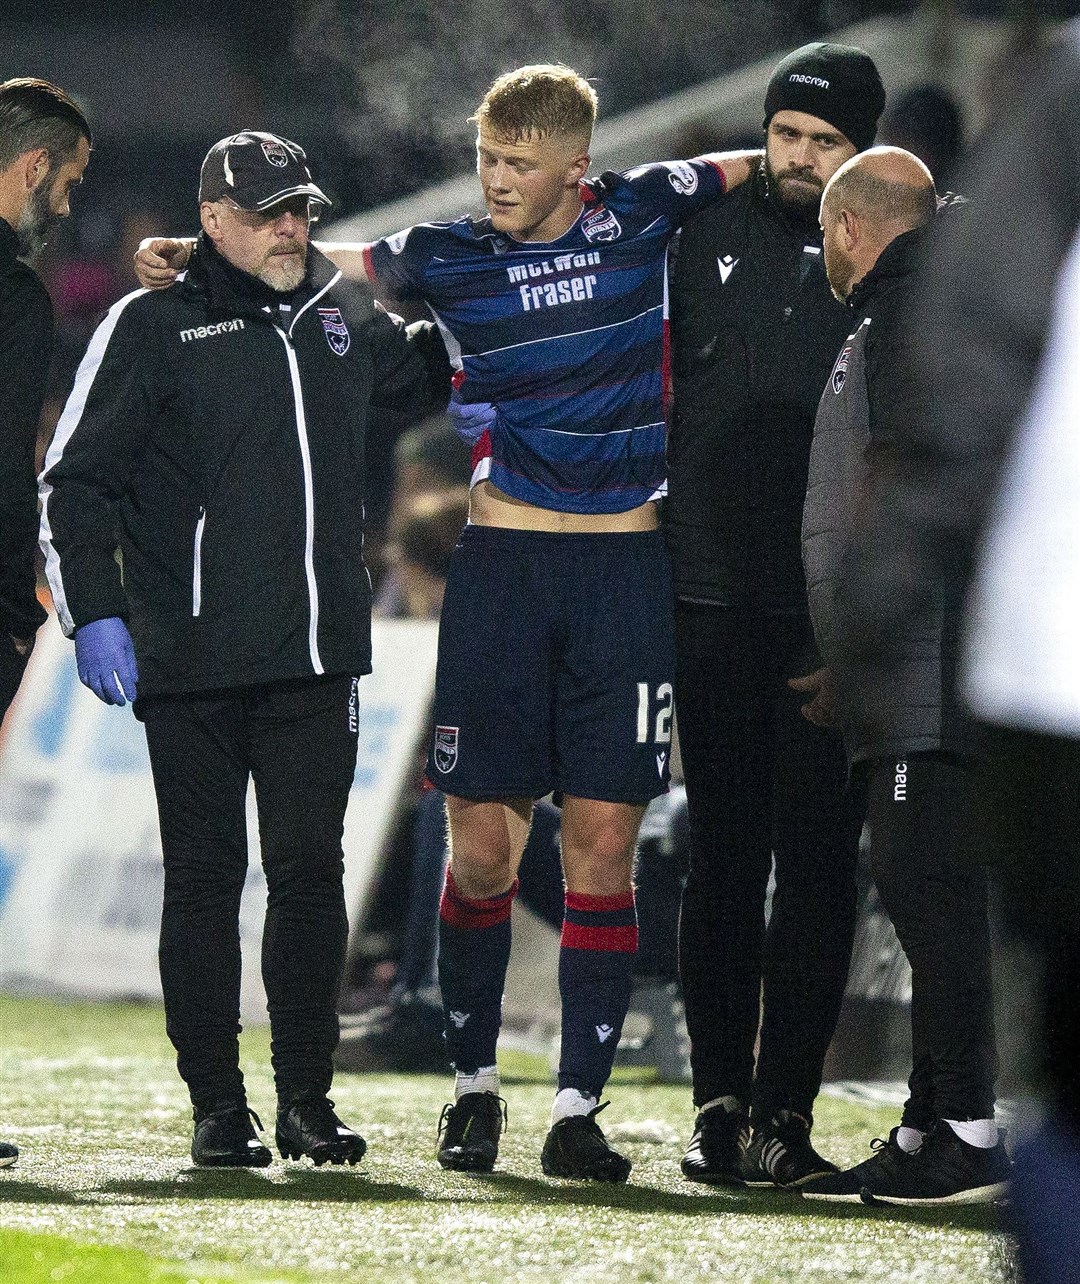 Picture - Ken Macpherson, Inverness. Ross County(0) v Rangers(4). 30.10.19. Ross County's Tom Grivosti had to be taken off injured..